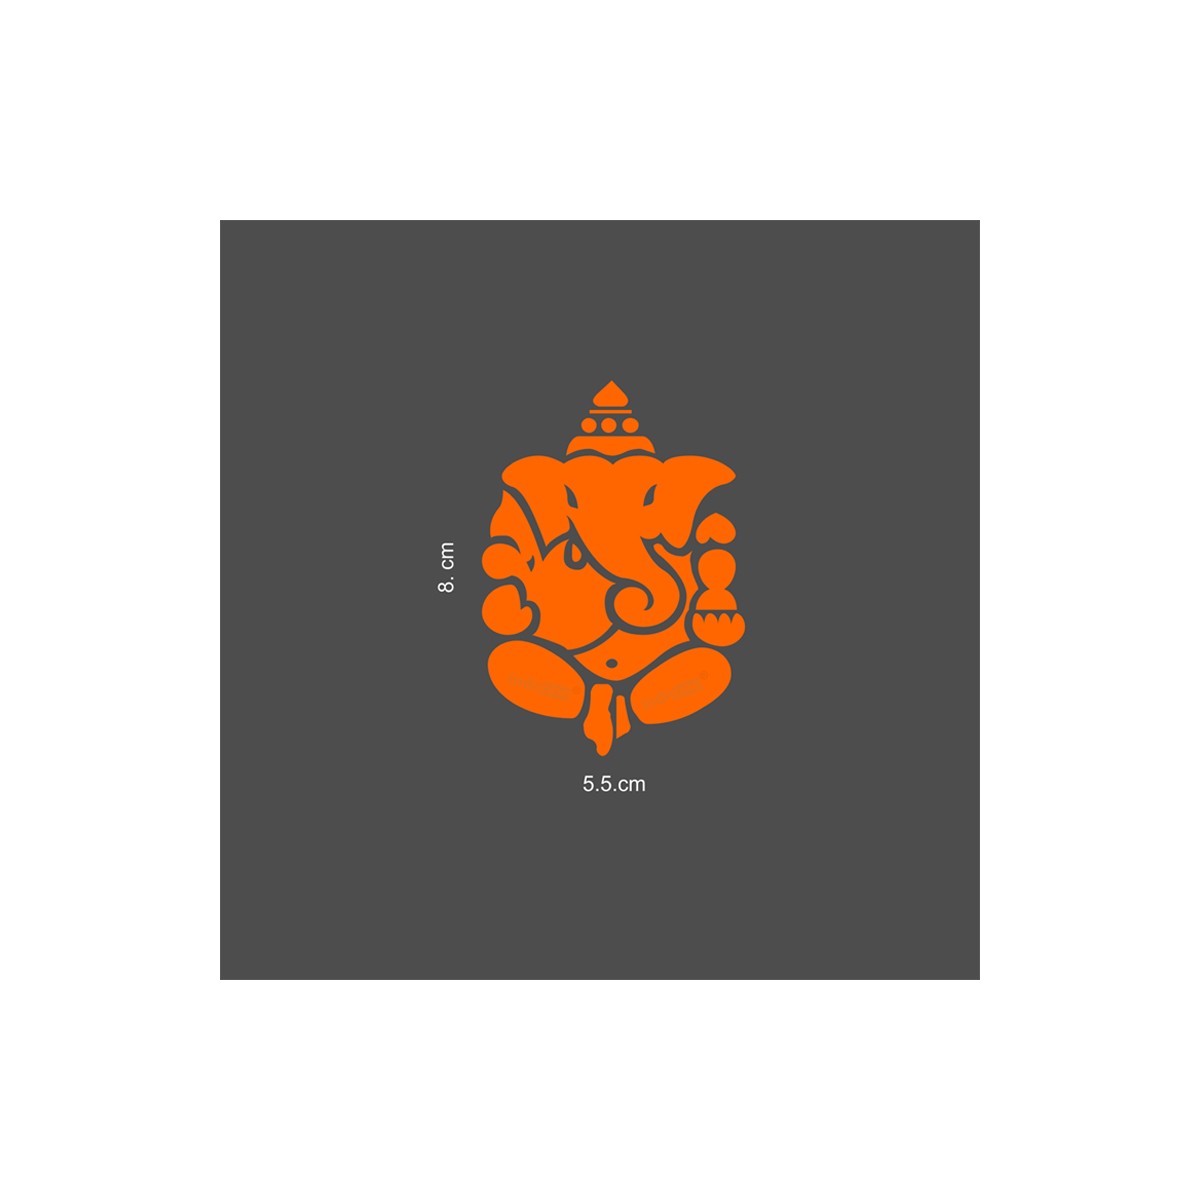 indnone® Lord Ganapathi Logo Sticker for Bike Water Proof PVC Vinyl Decal Sticker | Orange Color Standard Size